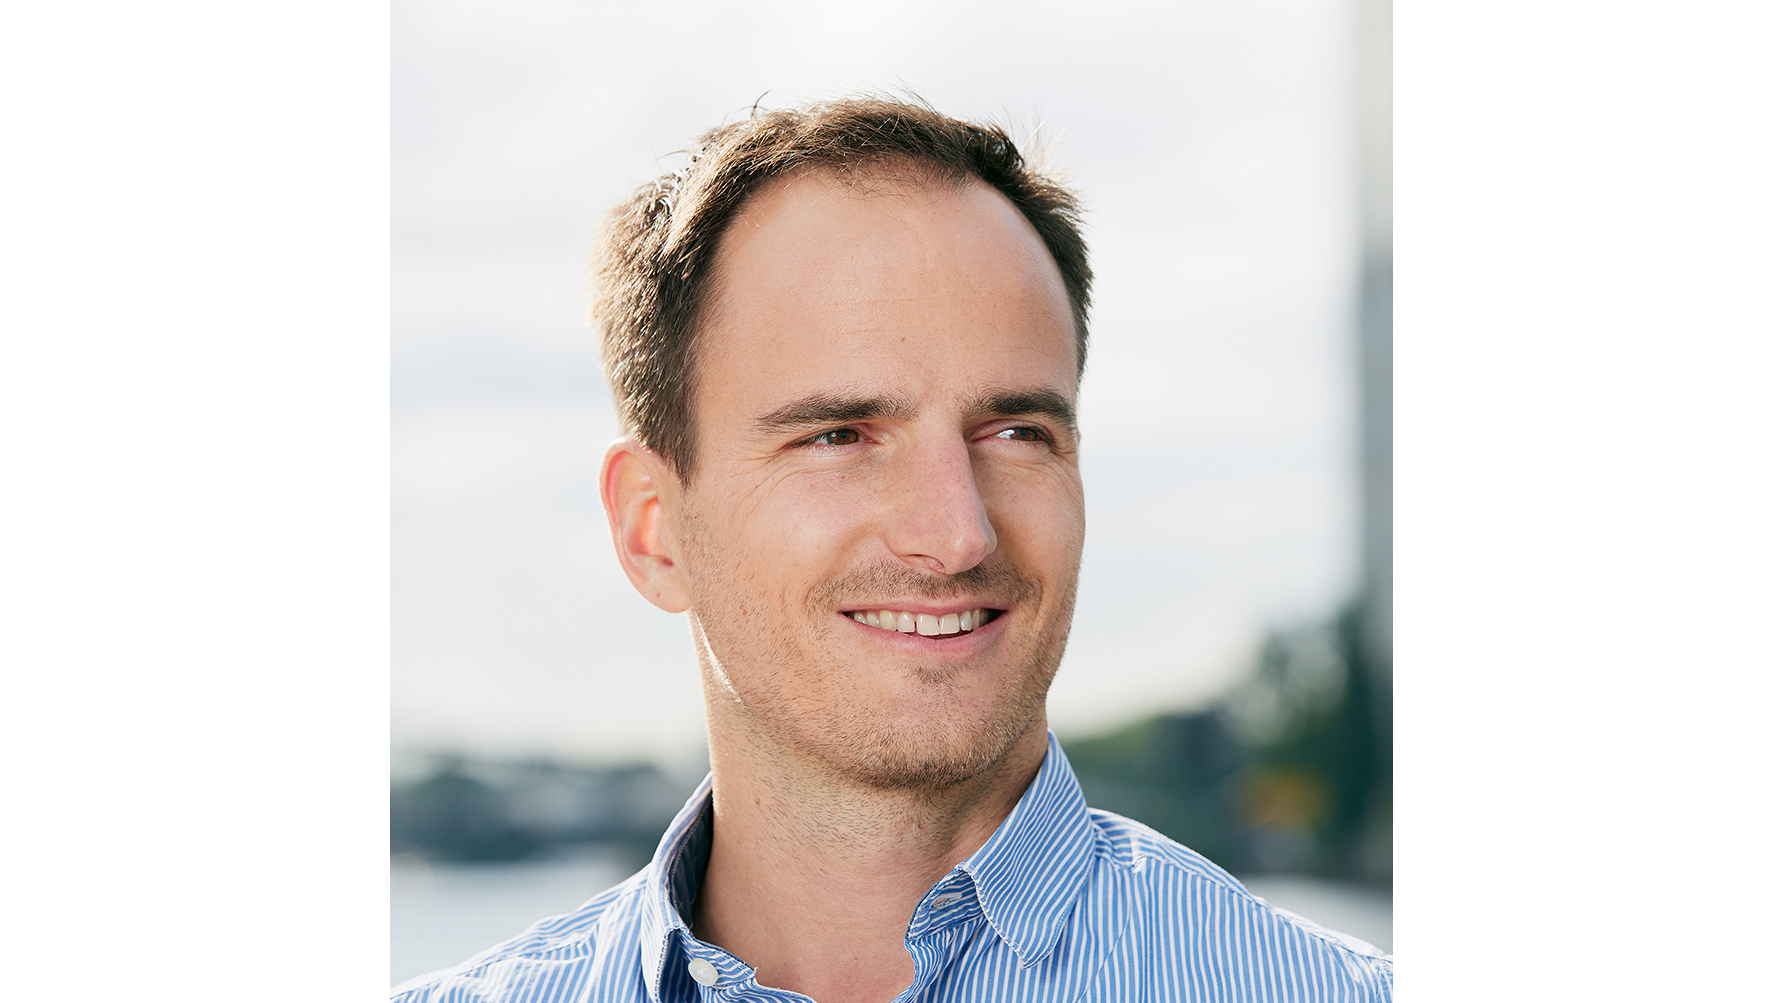 Beres Seelbach, CEO and founder of Onomotion GmbH